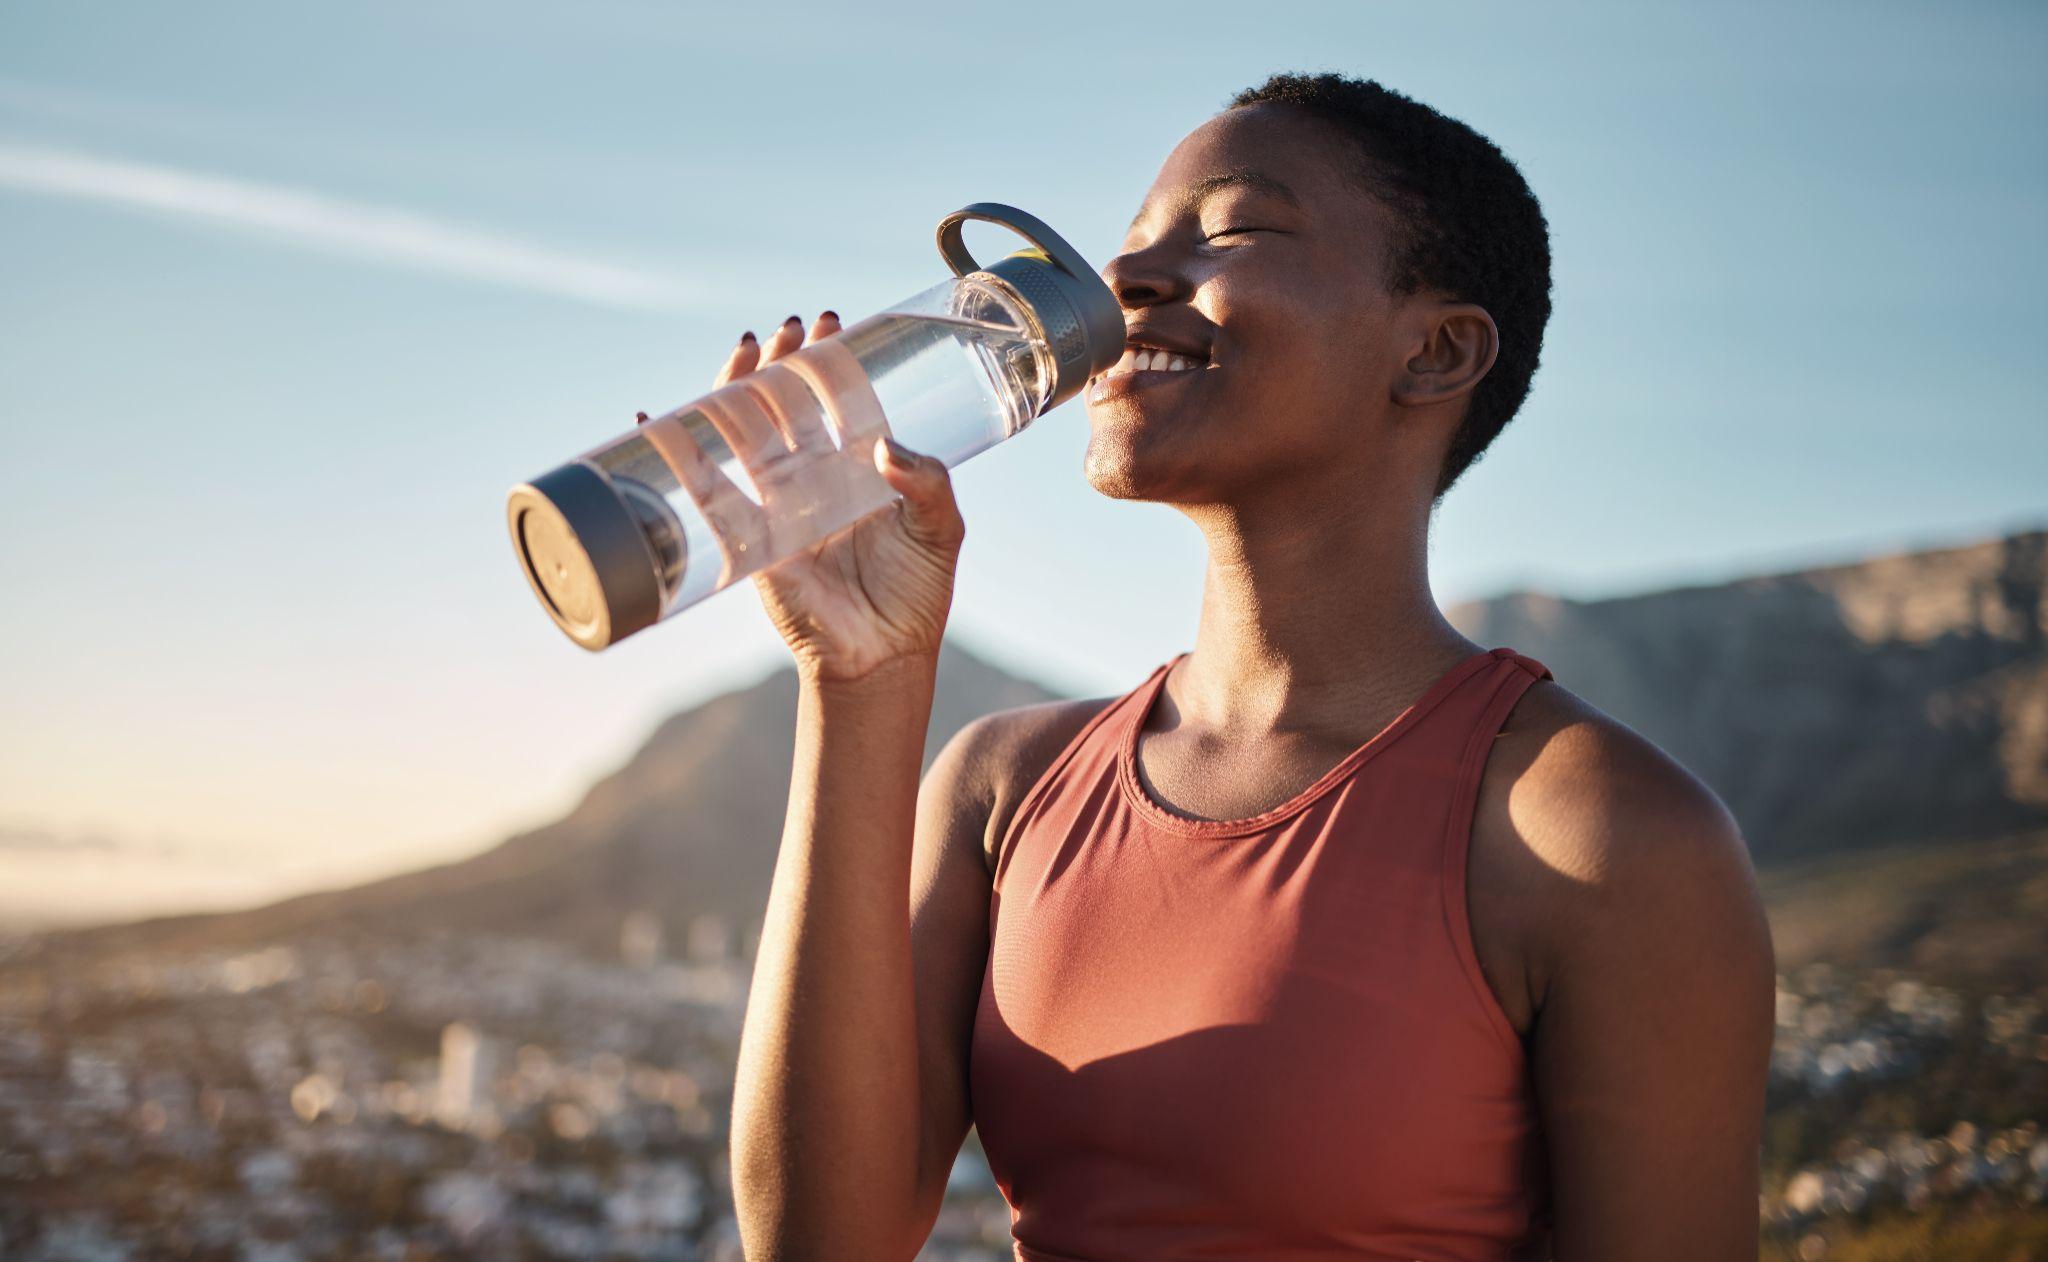 Black woman, runner and drinking water for outdoor exercise